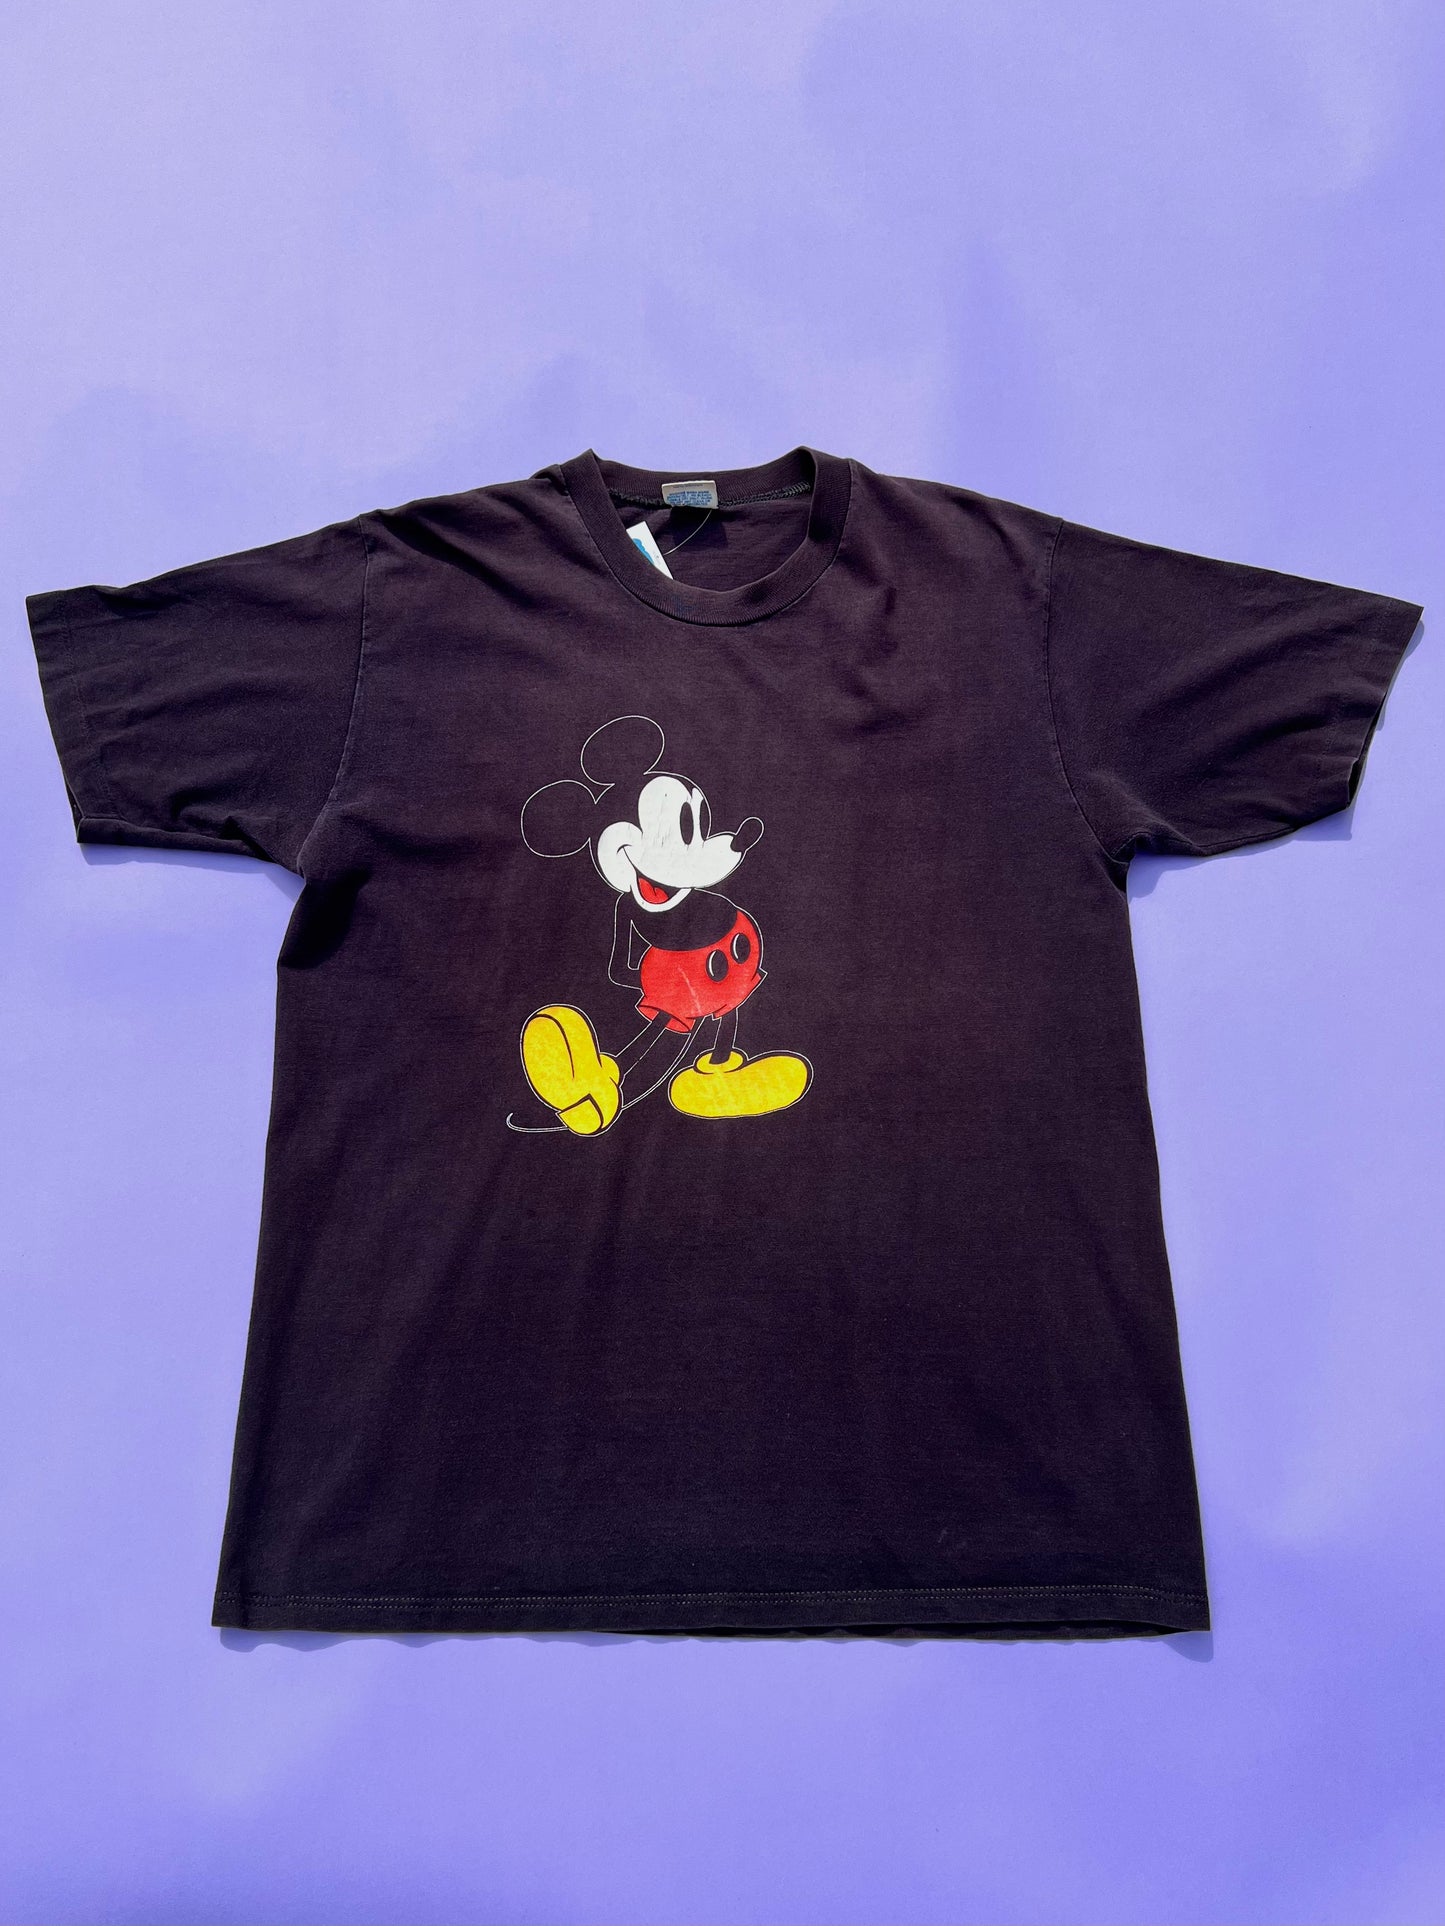 Vintage 80s Disney Mickey Mouse T Shirt